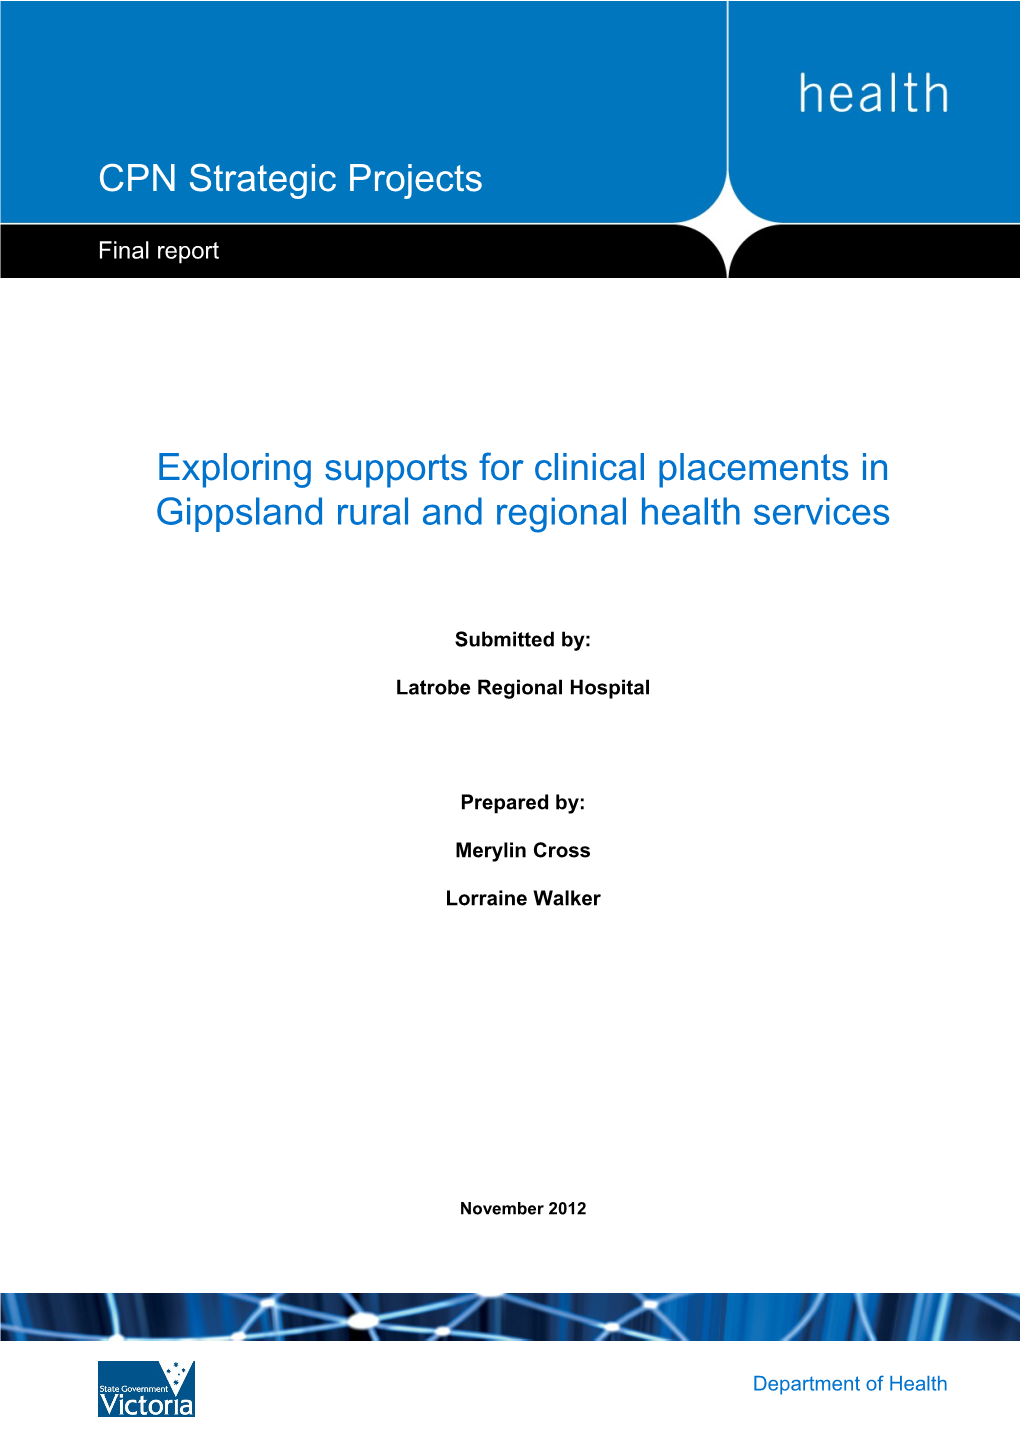 Exploring Supports for Clinical Placements in Gippsland Rural and Regional Health Services